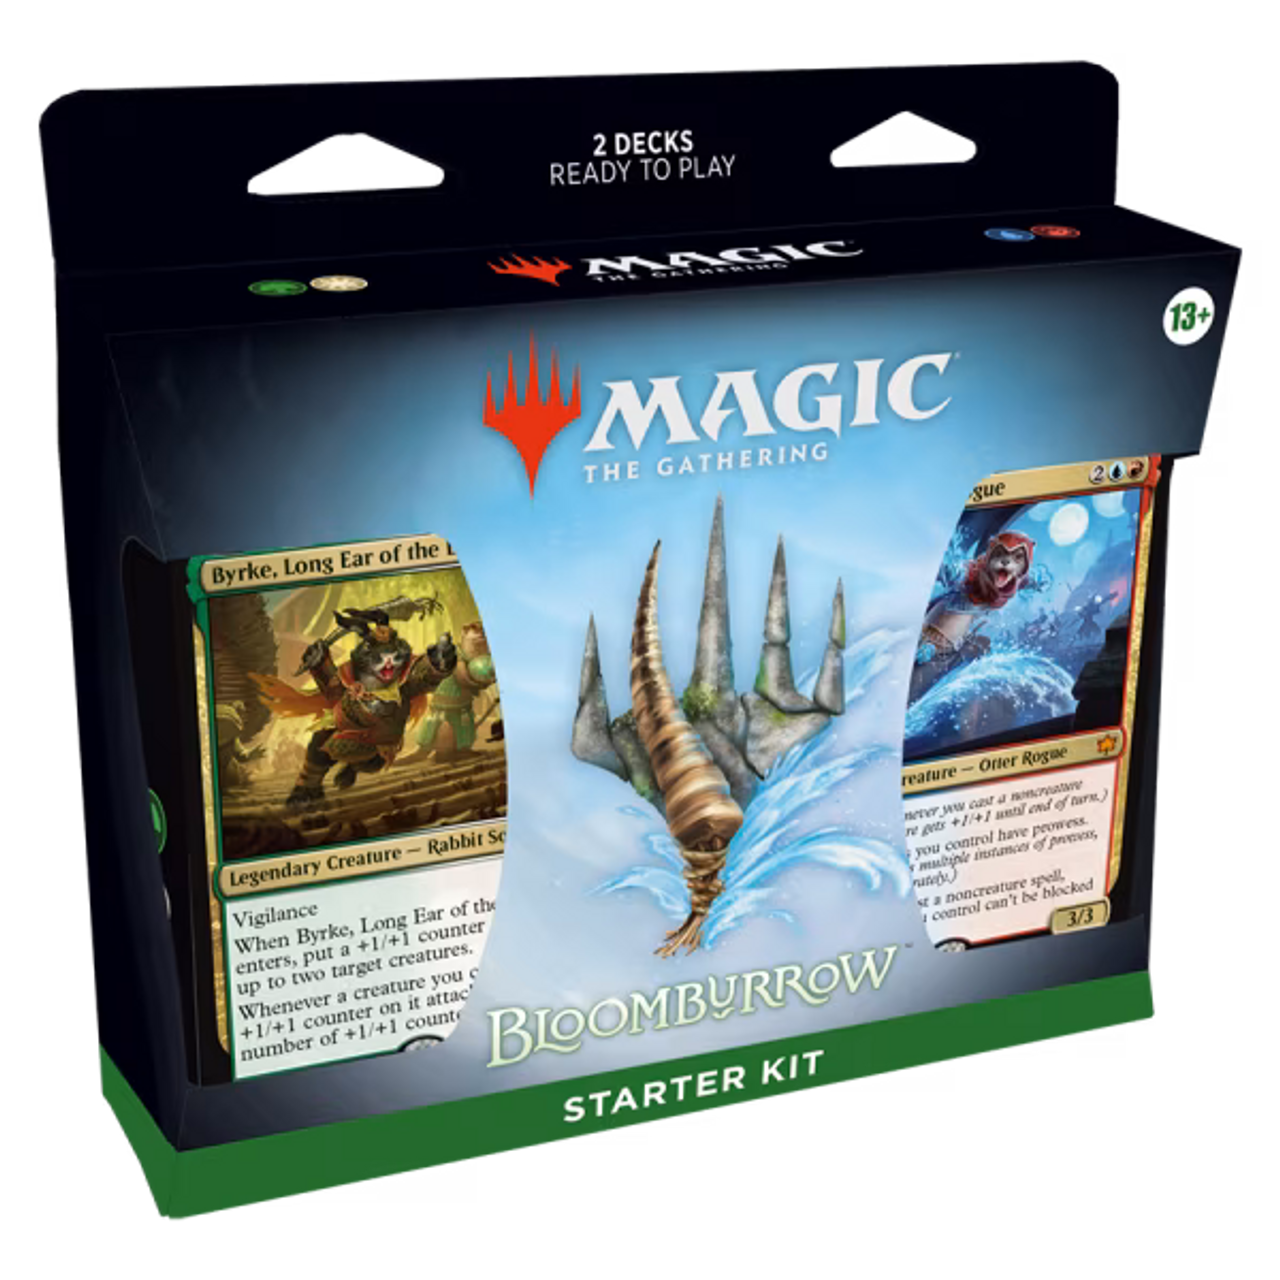 Magic: The Gathering - Bloomburrow Starter Kit - Release Date 2/8/24 - Loaded Dice